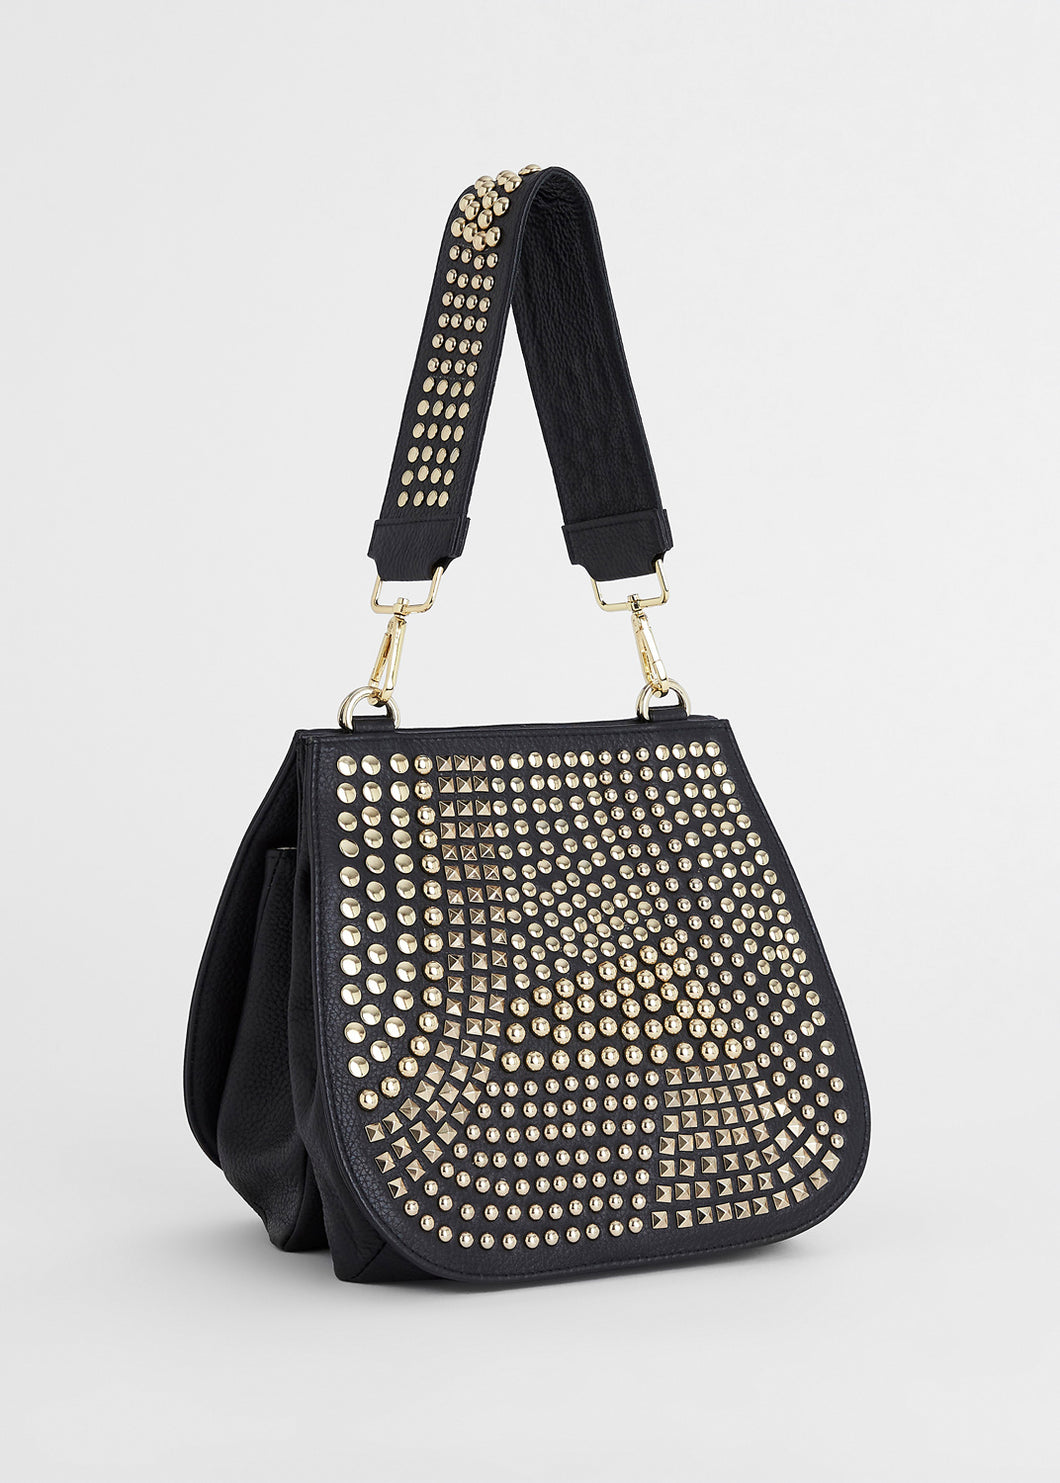 Double_Sided_Saddle_Bag_in_Black_Gold_Stud